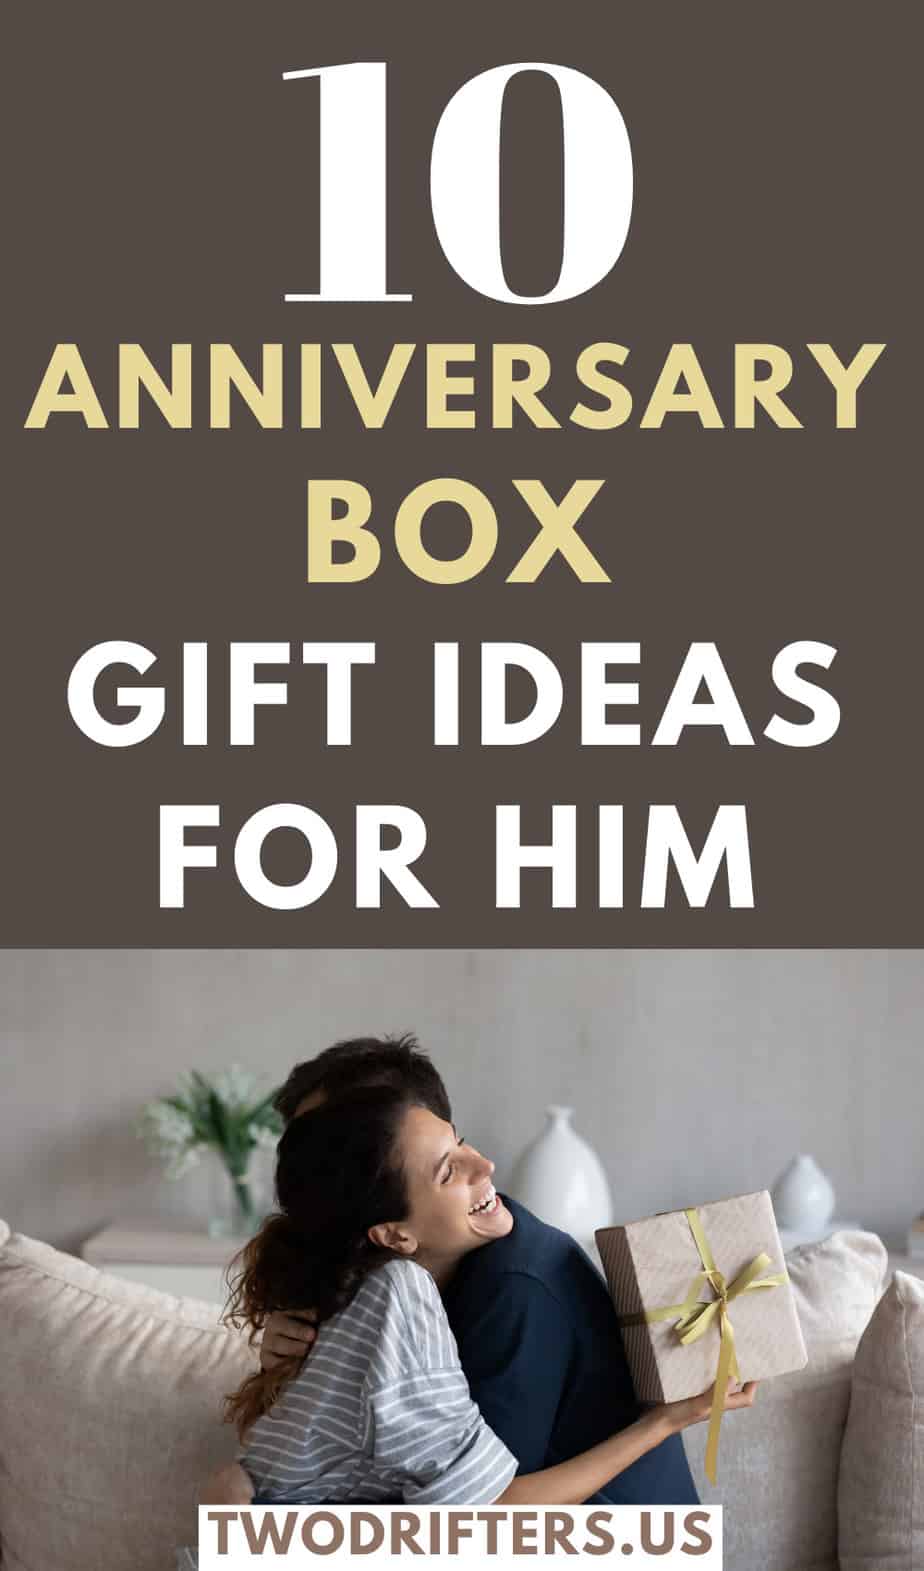 Pinterest social image that says “10 anniversary box gift ideas for him.”